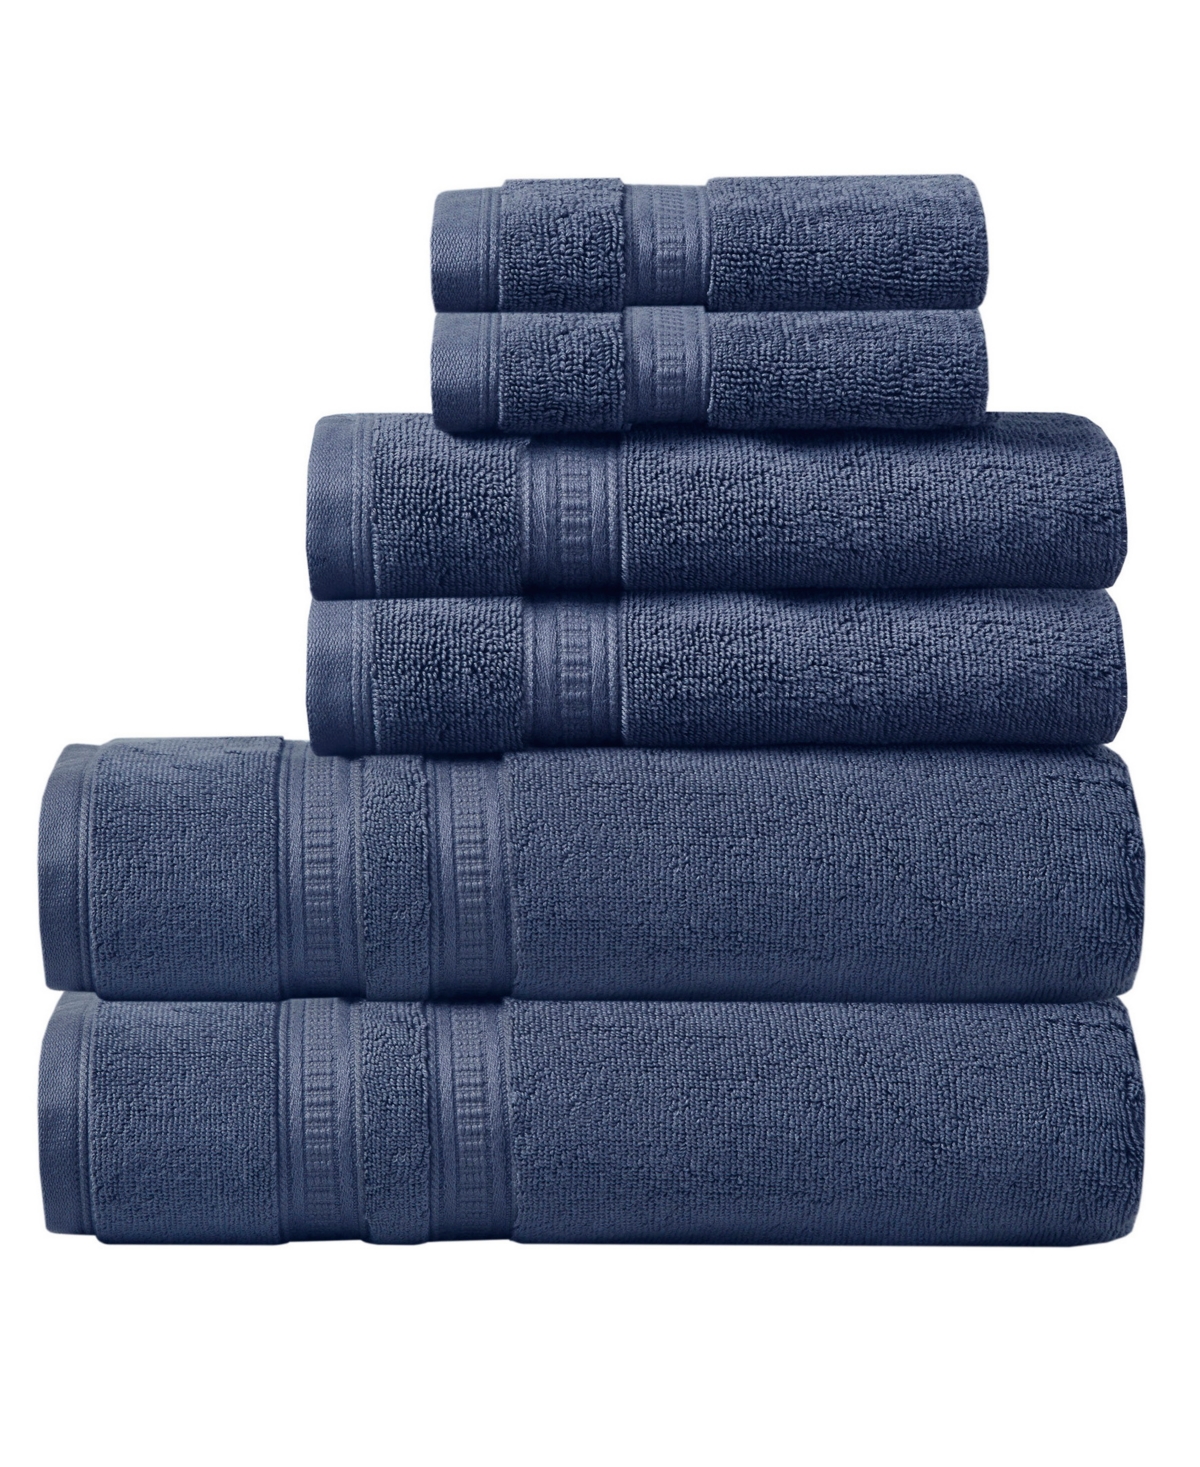 Beautyrest Plume Feather Touch Cotton 6-pc. Bath Towel Set In Navy